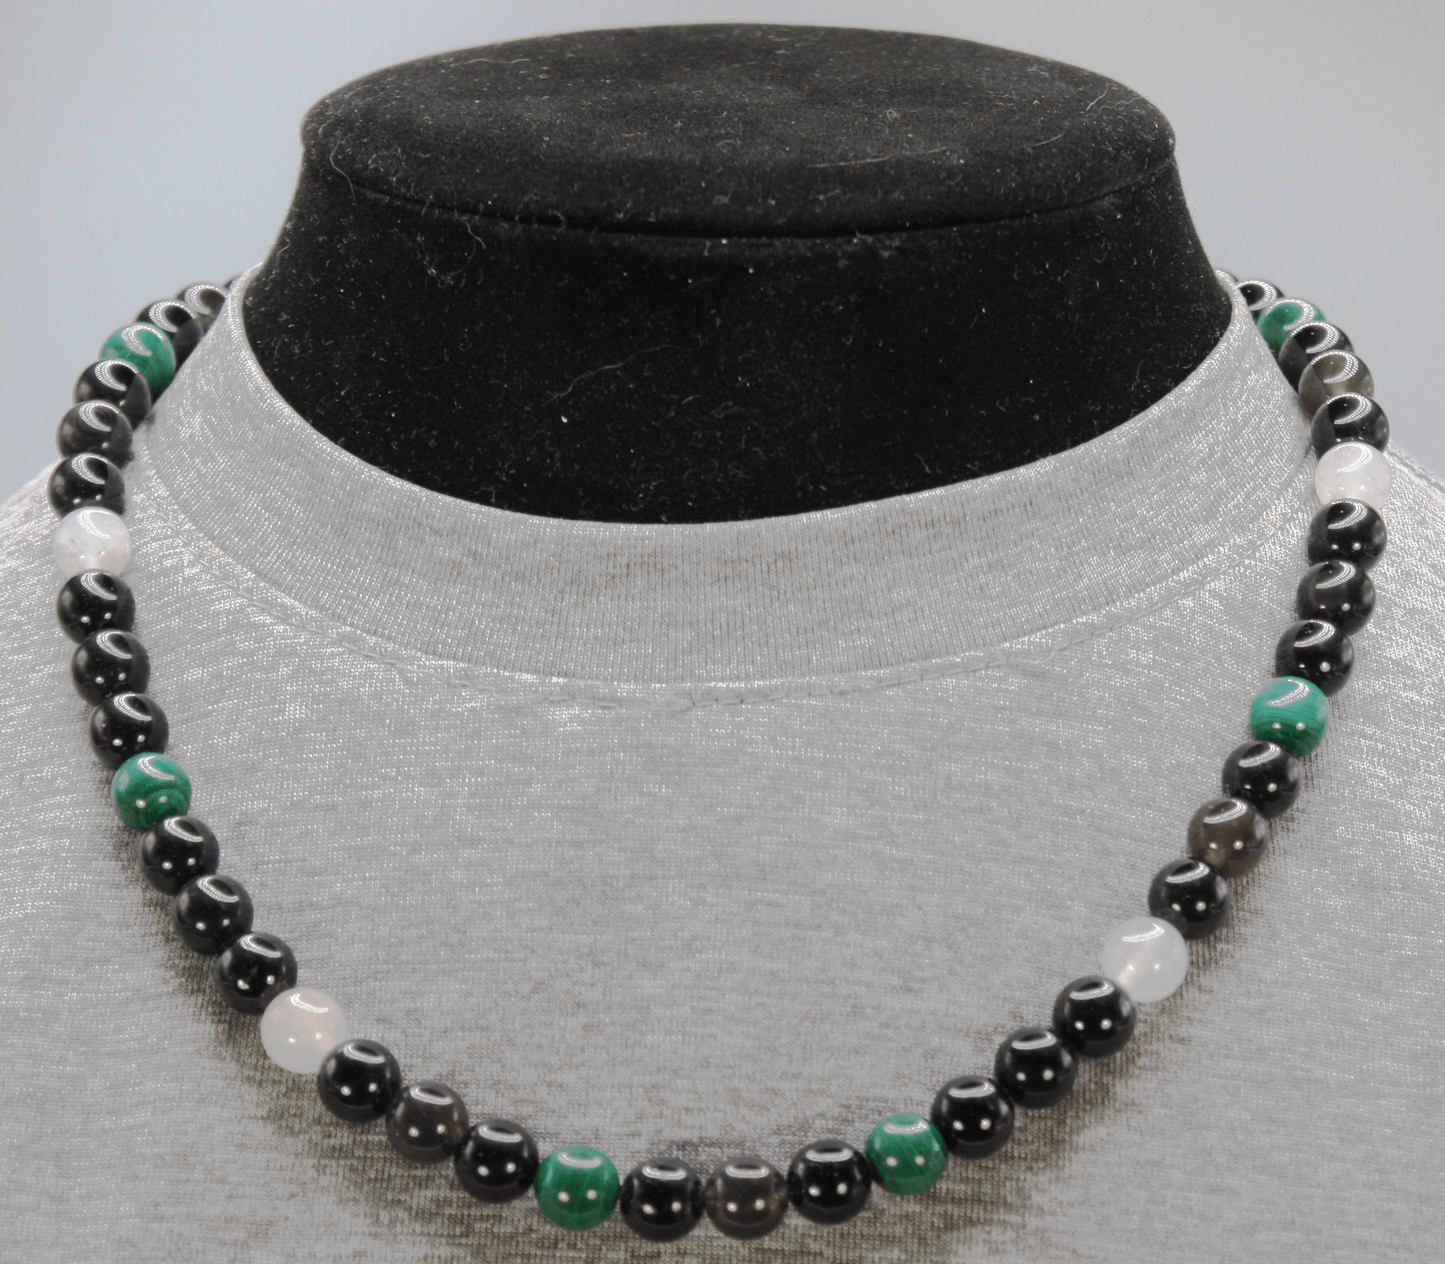 Black Onyx, Black Tourmaline, Malachite, and Rose Quartz Necklace - A Harmonic Blend of Protection, Healing, and Love